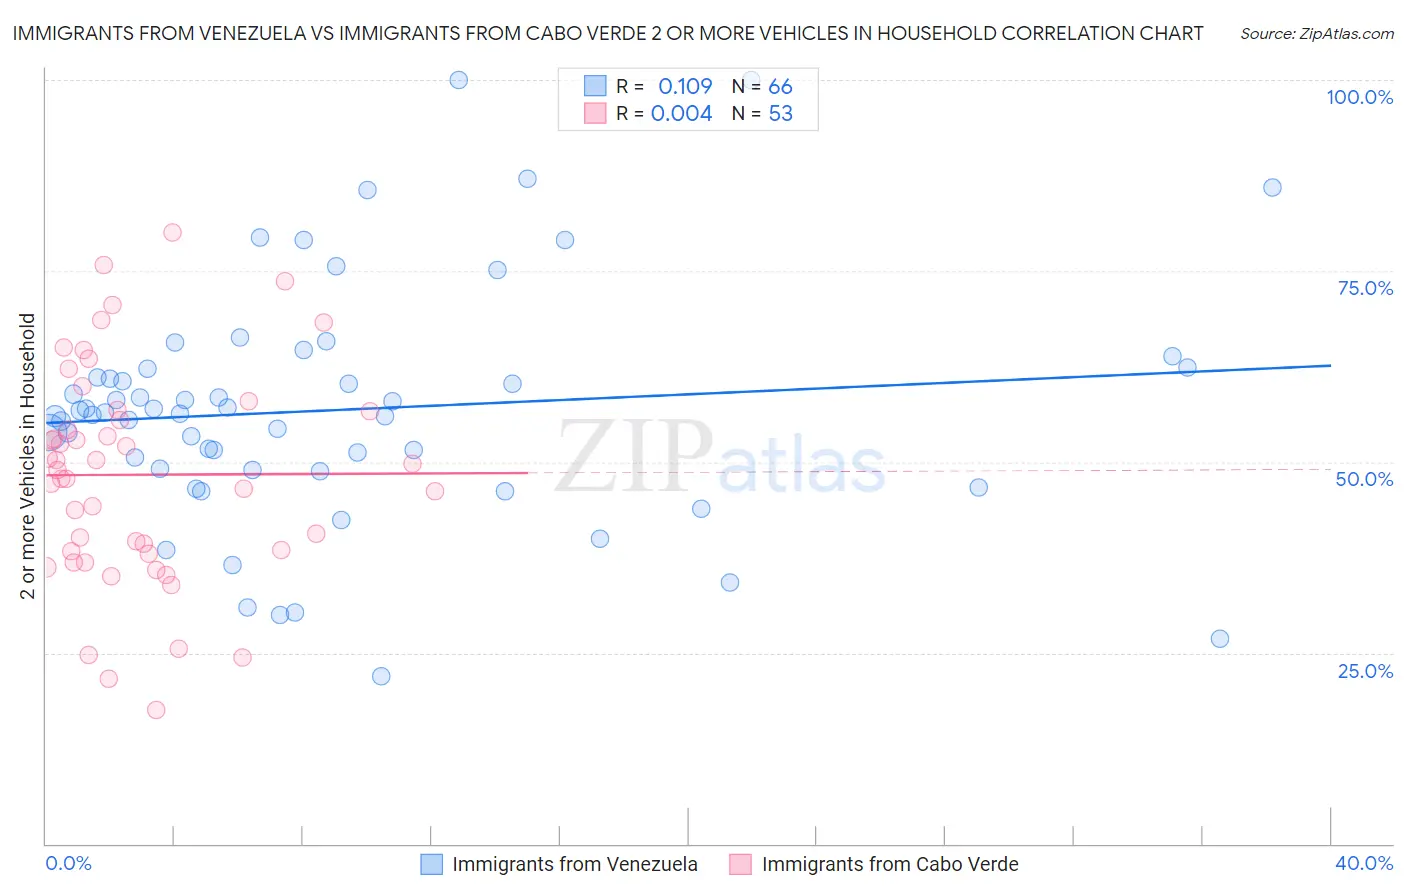 Immigrants from Venezuela vs Immigrants from Cabo Verde 2 or more Vehicles in Household